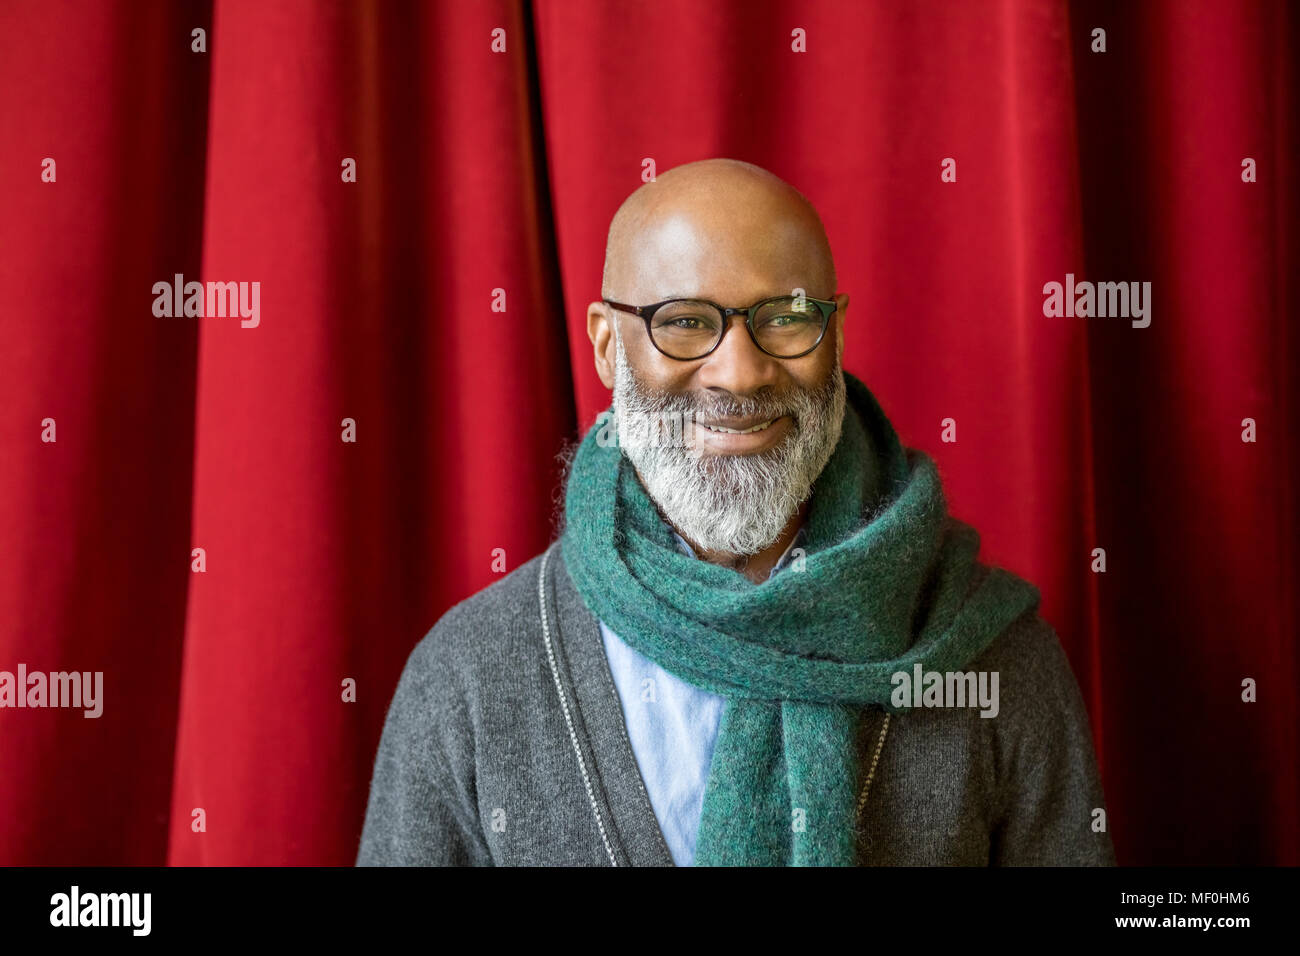 Portrait of smiling man wearing glasses and scarf in front of red curtain Stock Photo